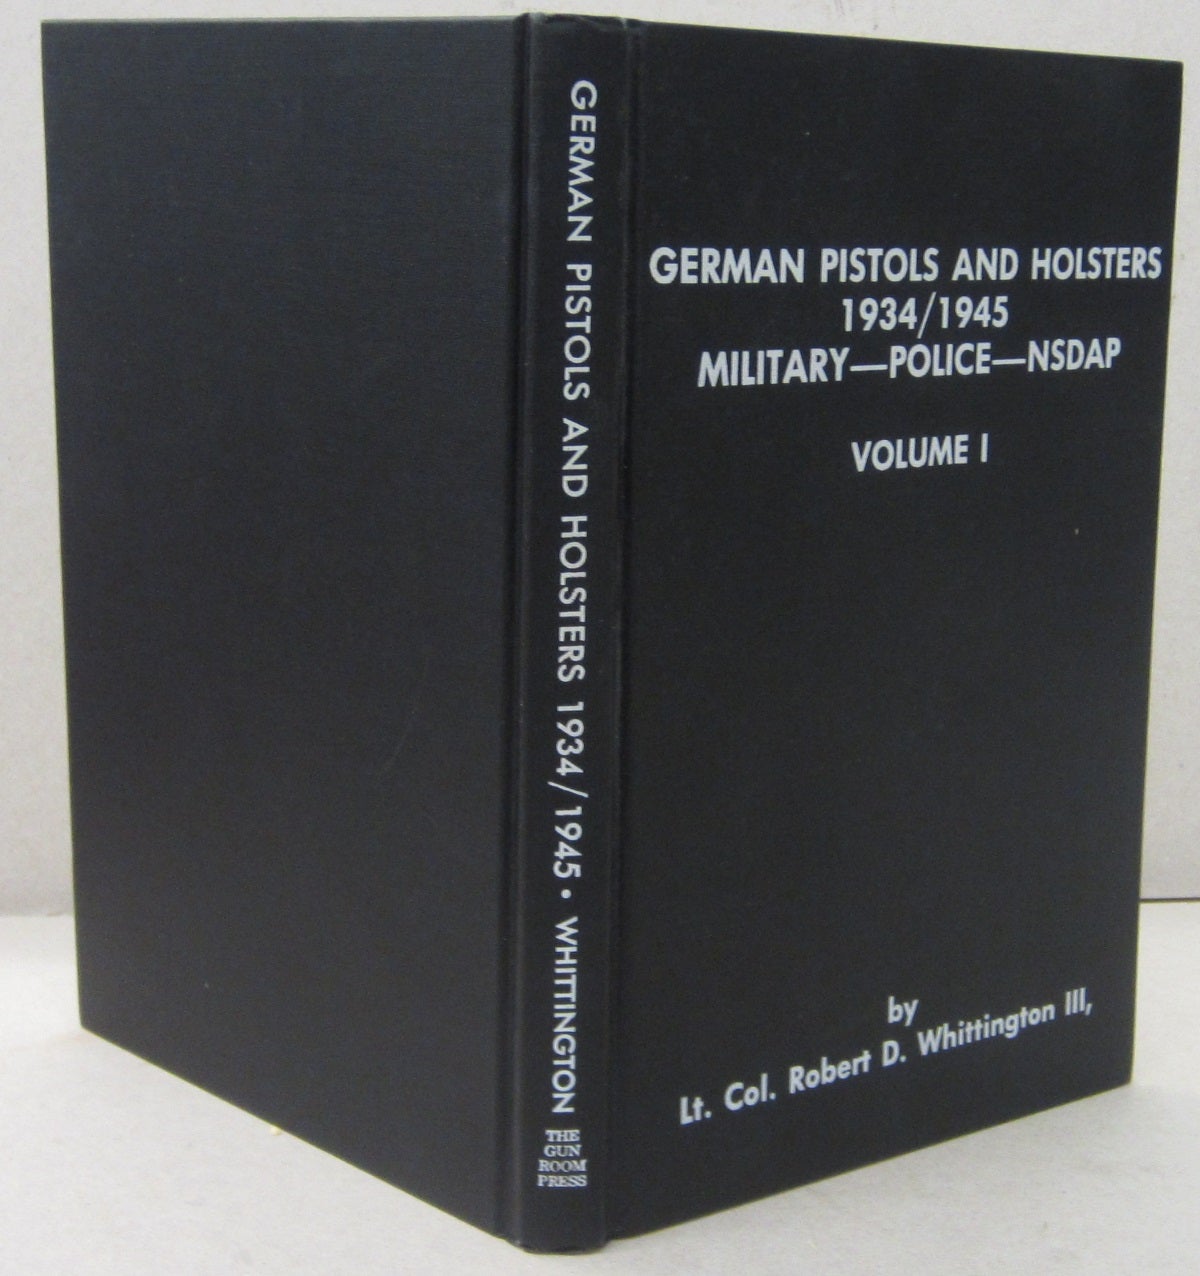 German Pistols and Holsters, 1934-1945: Military, Police, NSDAP